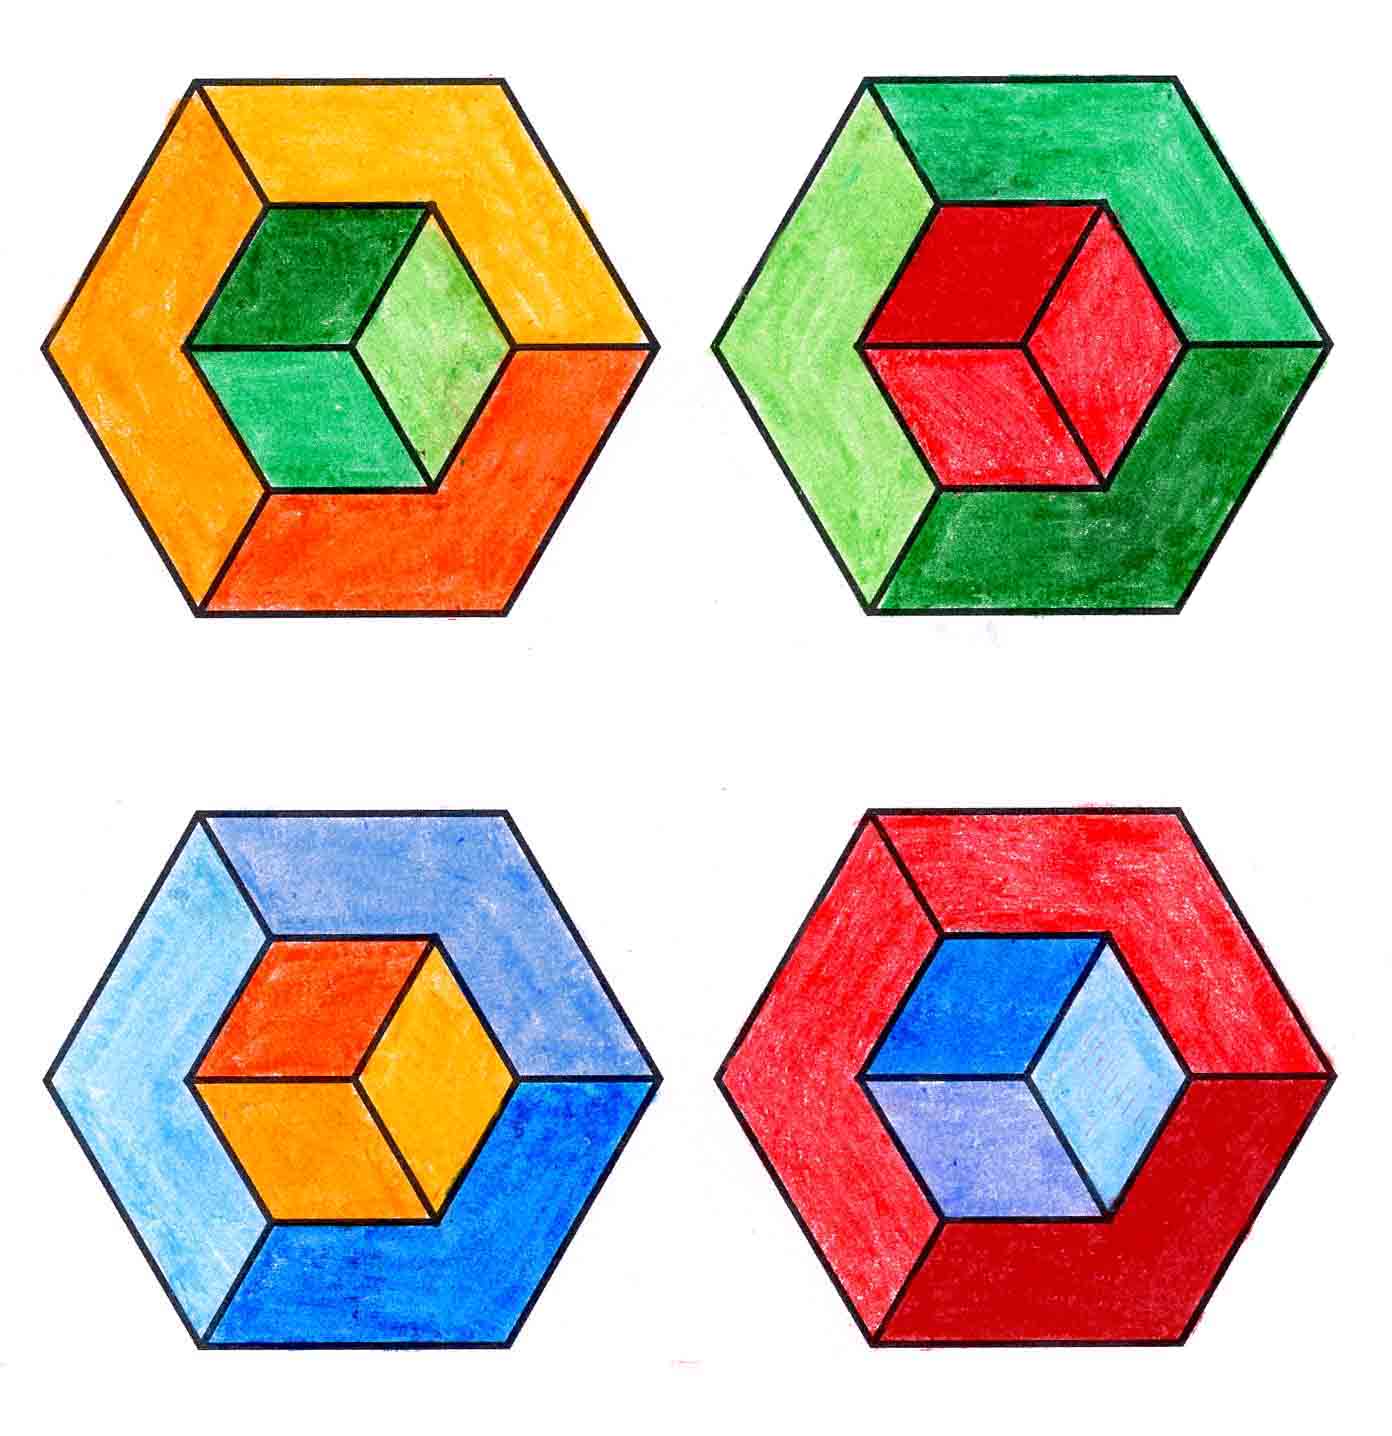 Op Art Lesson Draw a 3D Illusion Cube Art Projects for Kids Bloglovin’